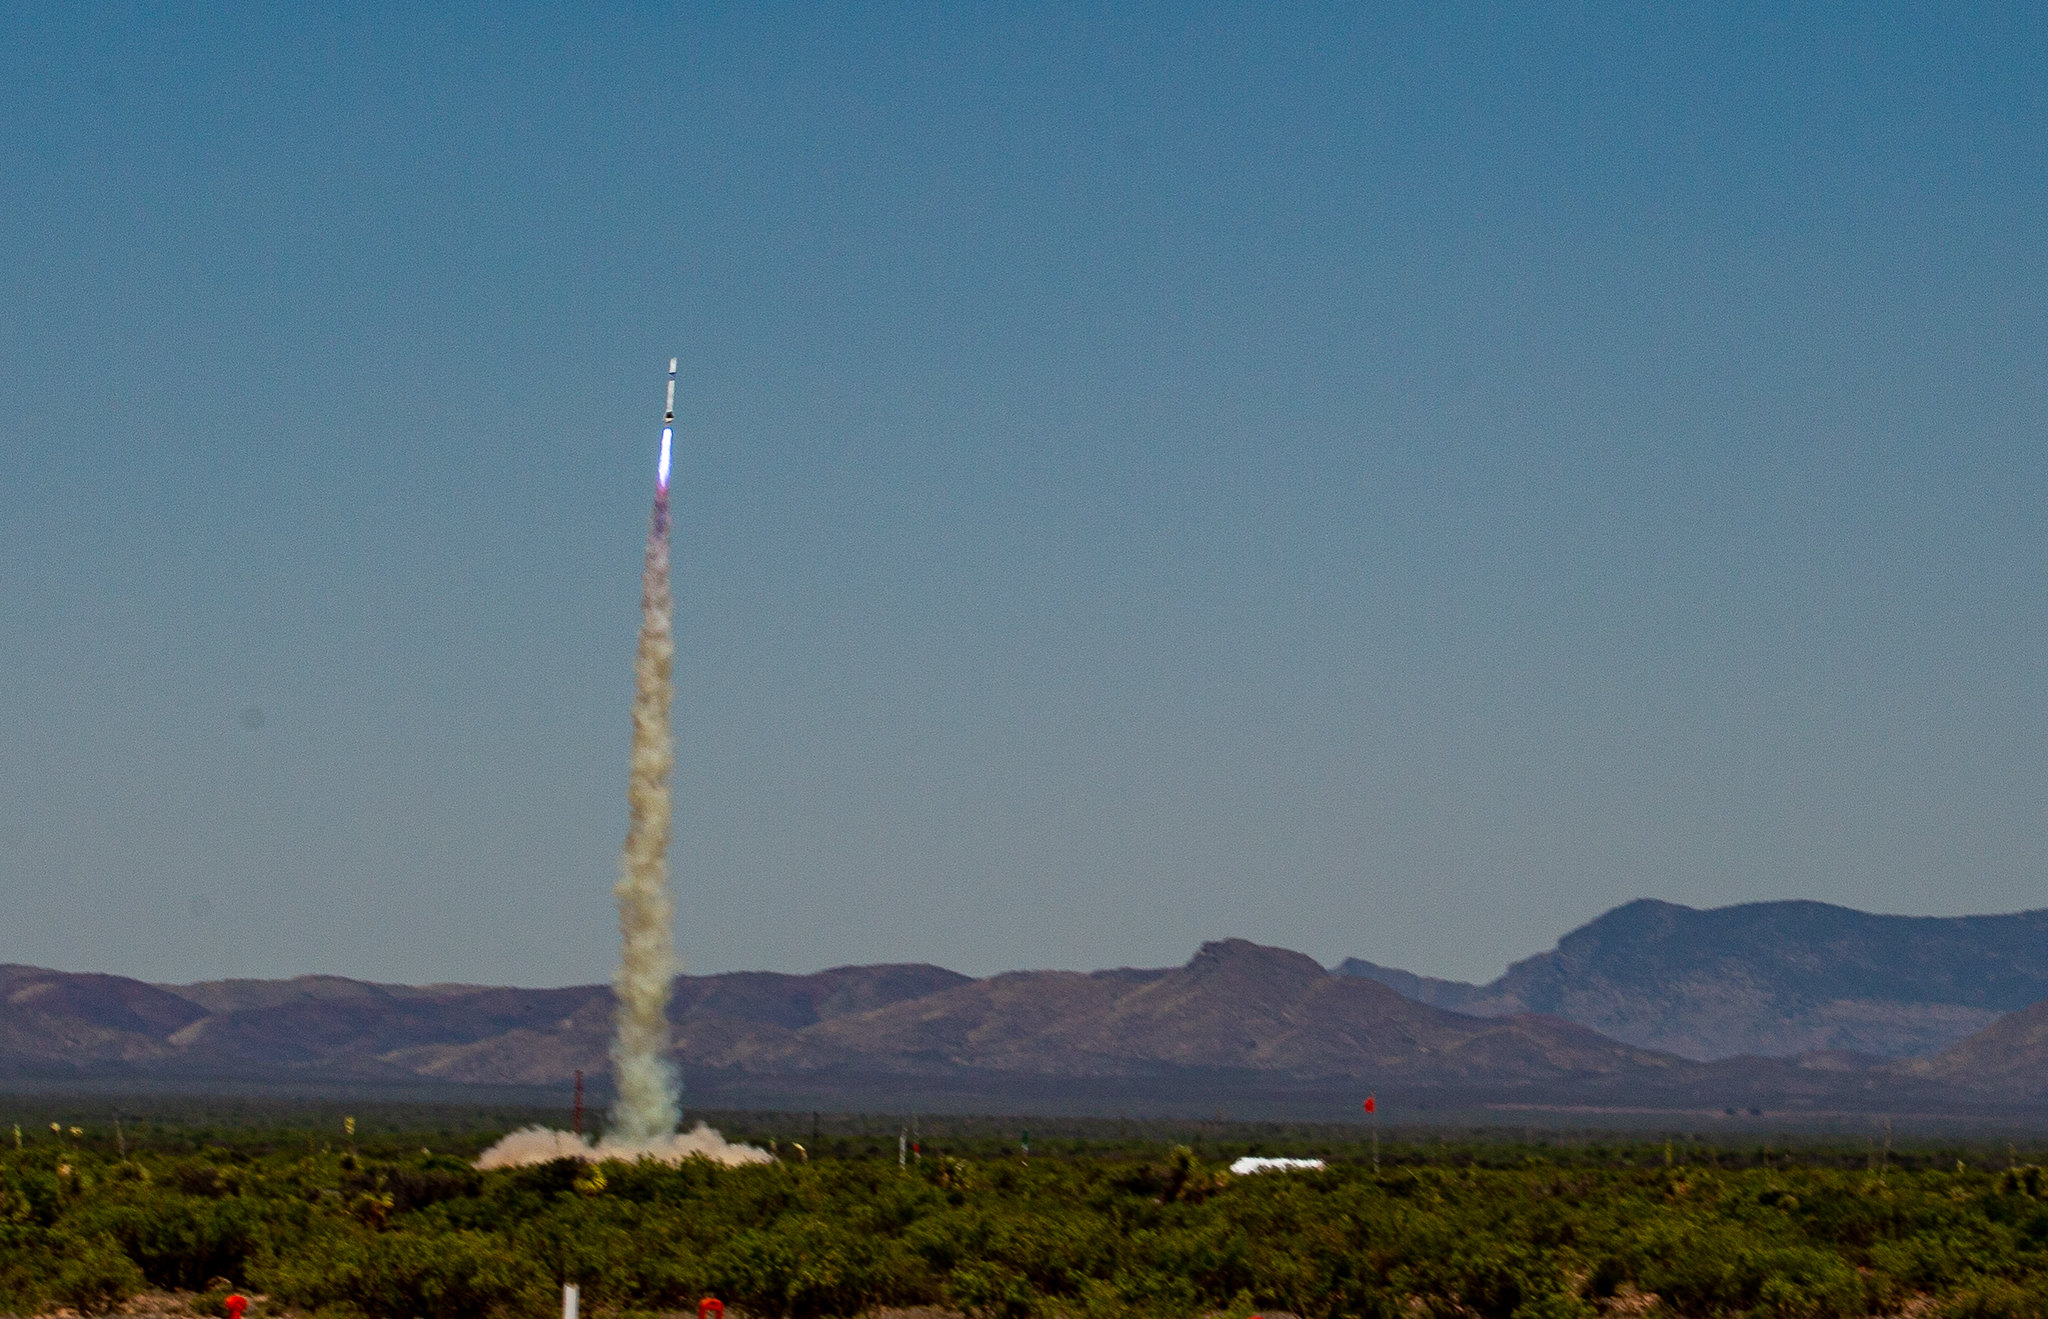 Calling All Student Rocketeers! Spaceport America Cup Applications Are Due Friday